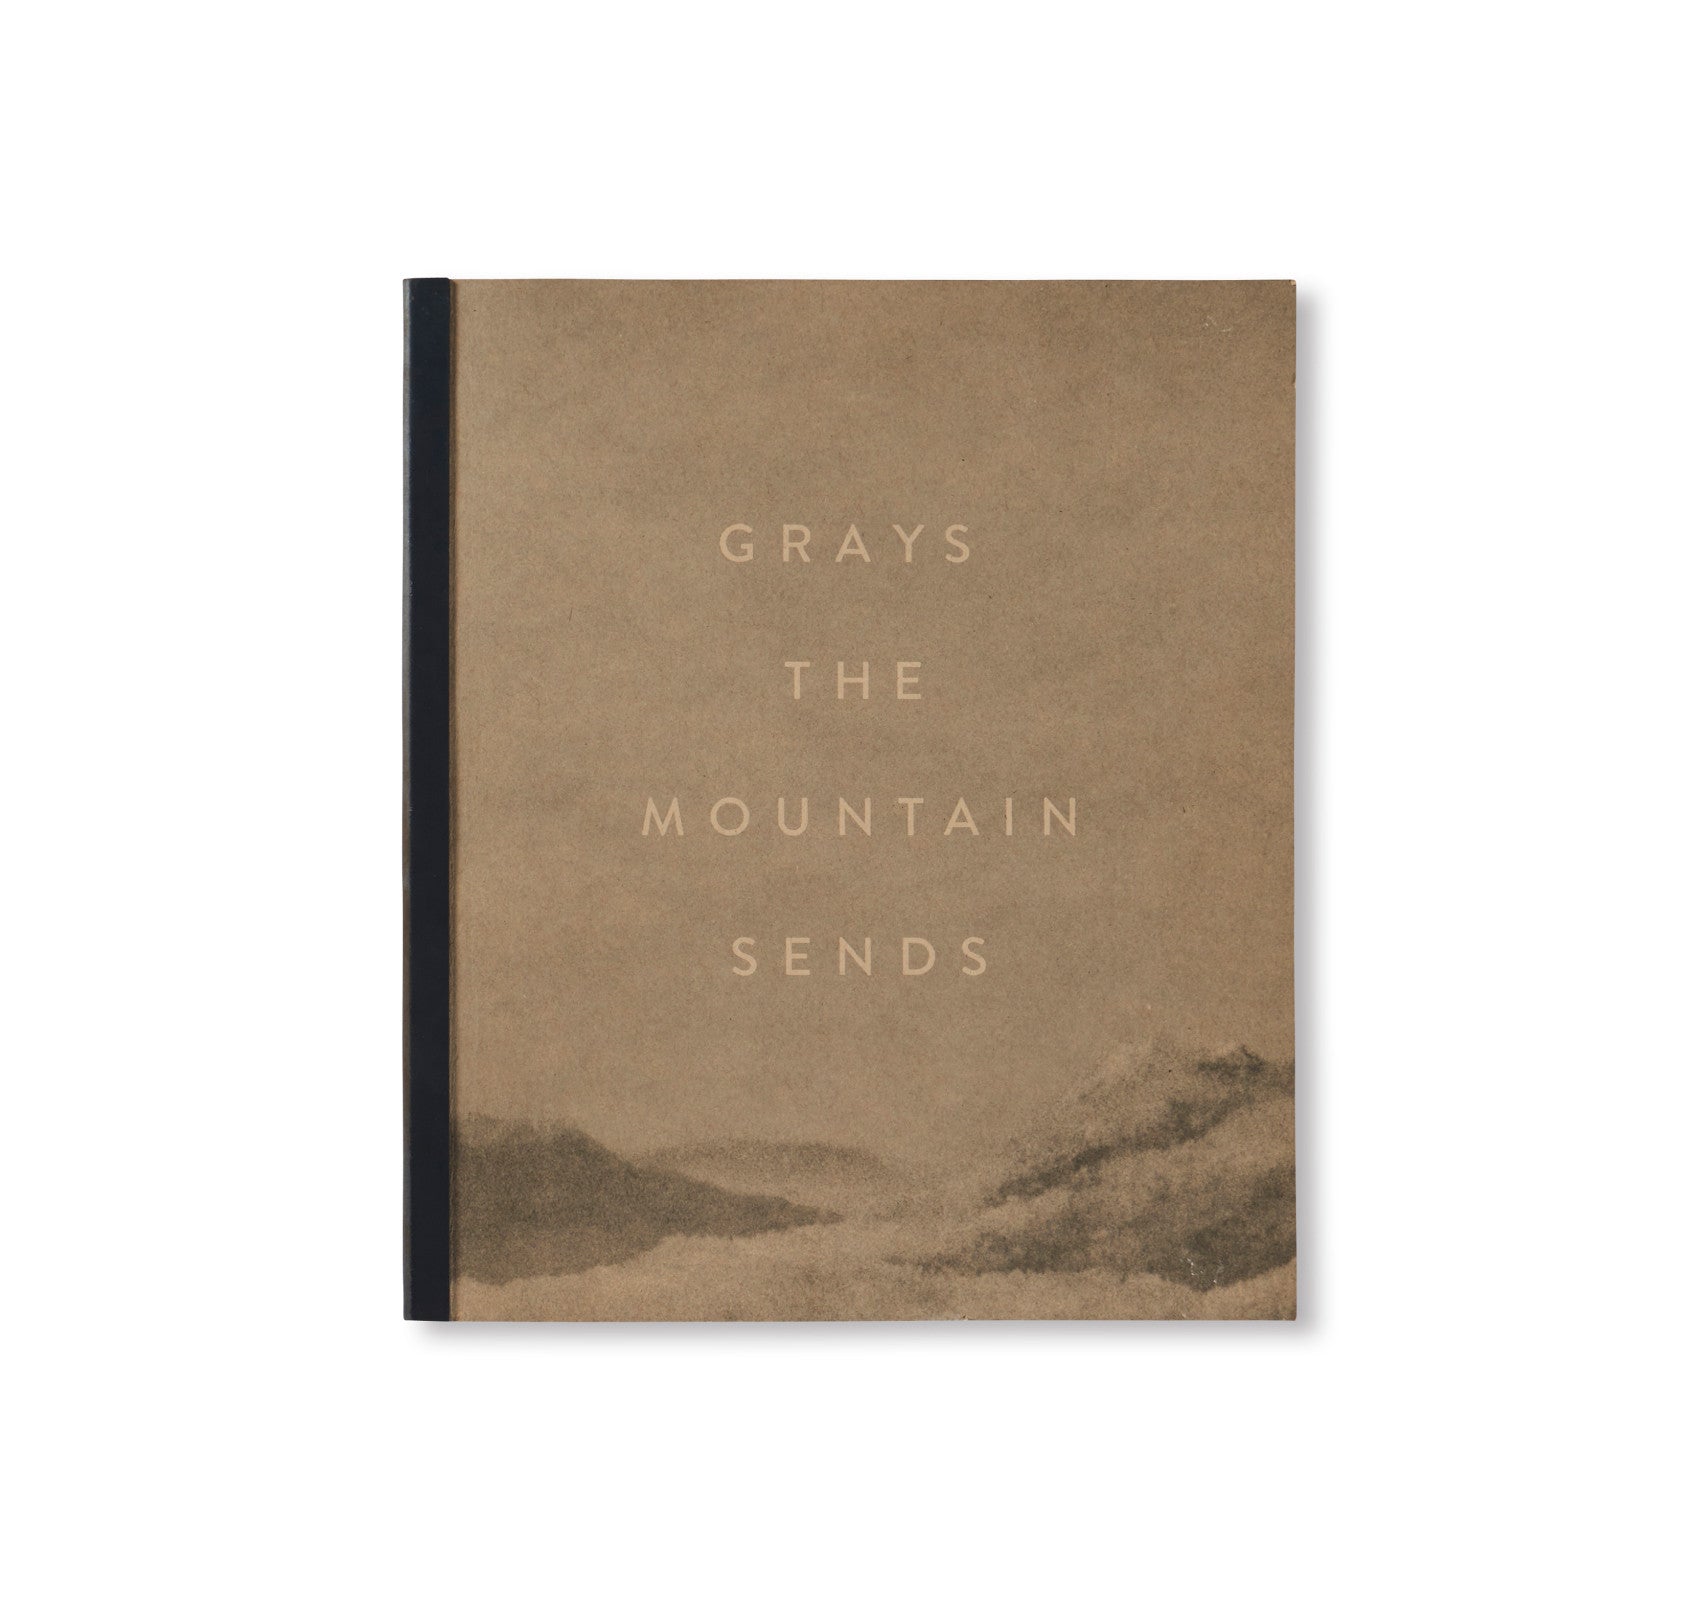 GRAYS THE MOUNTAIN SENDS by Bryan Schutmaat